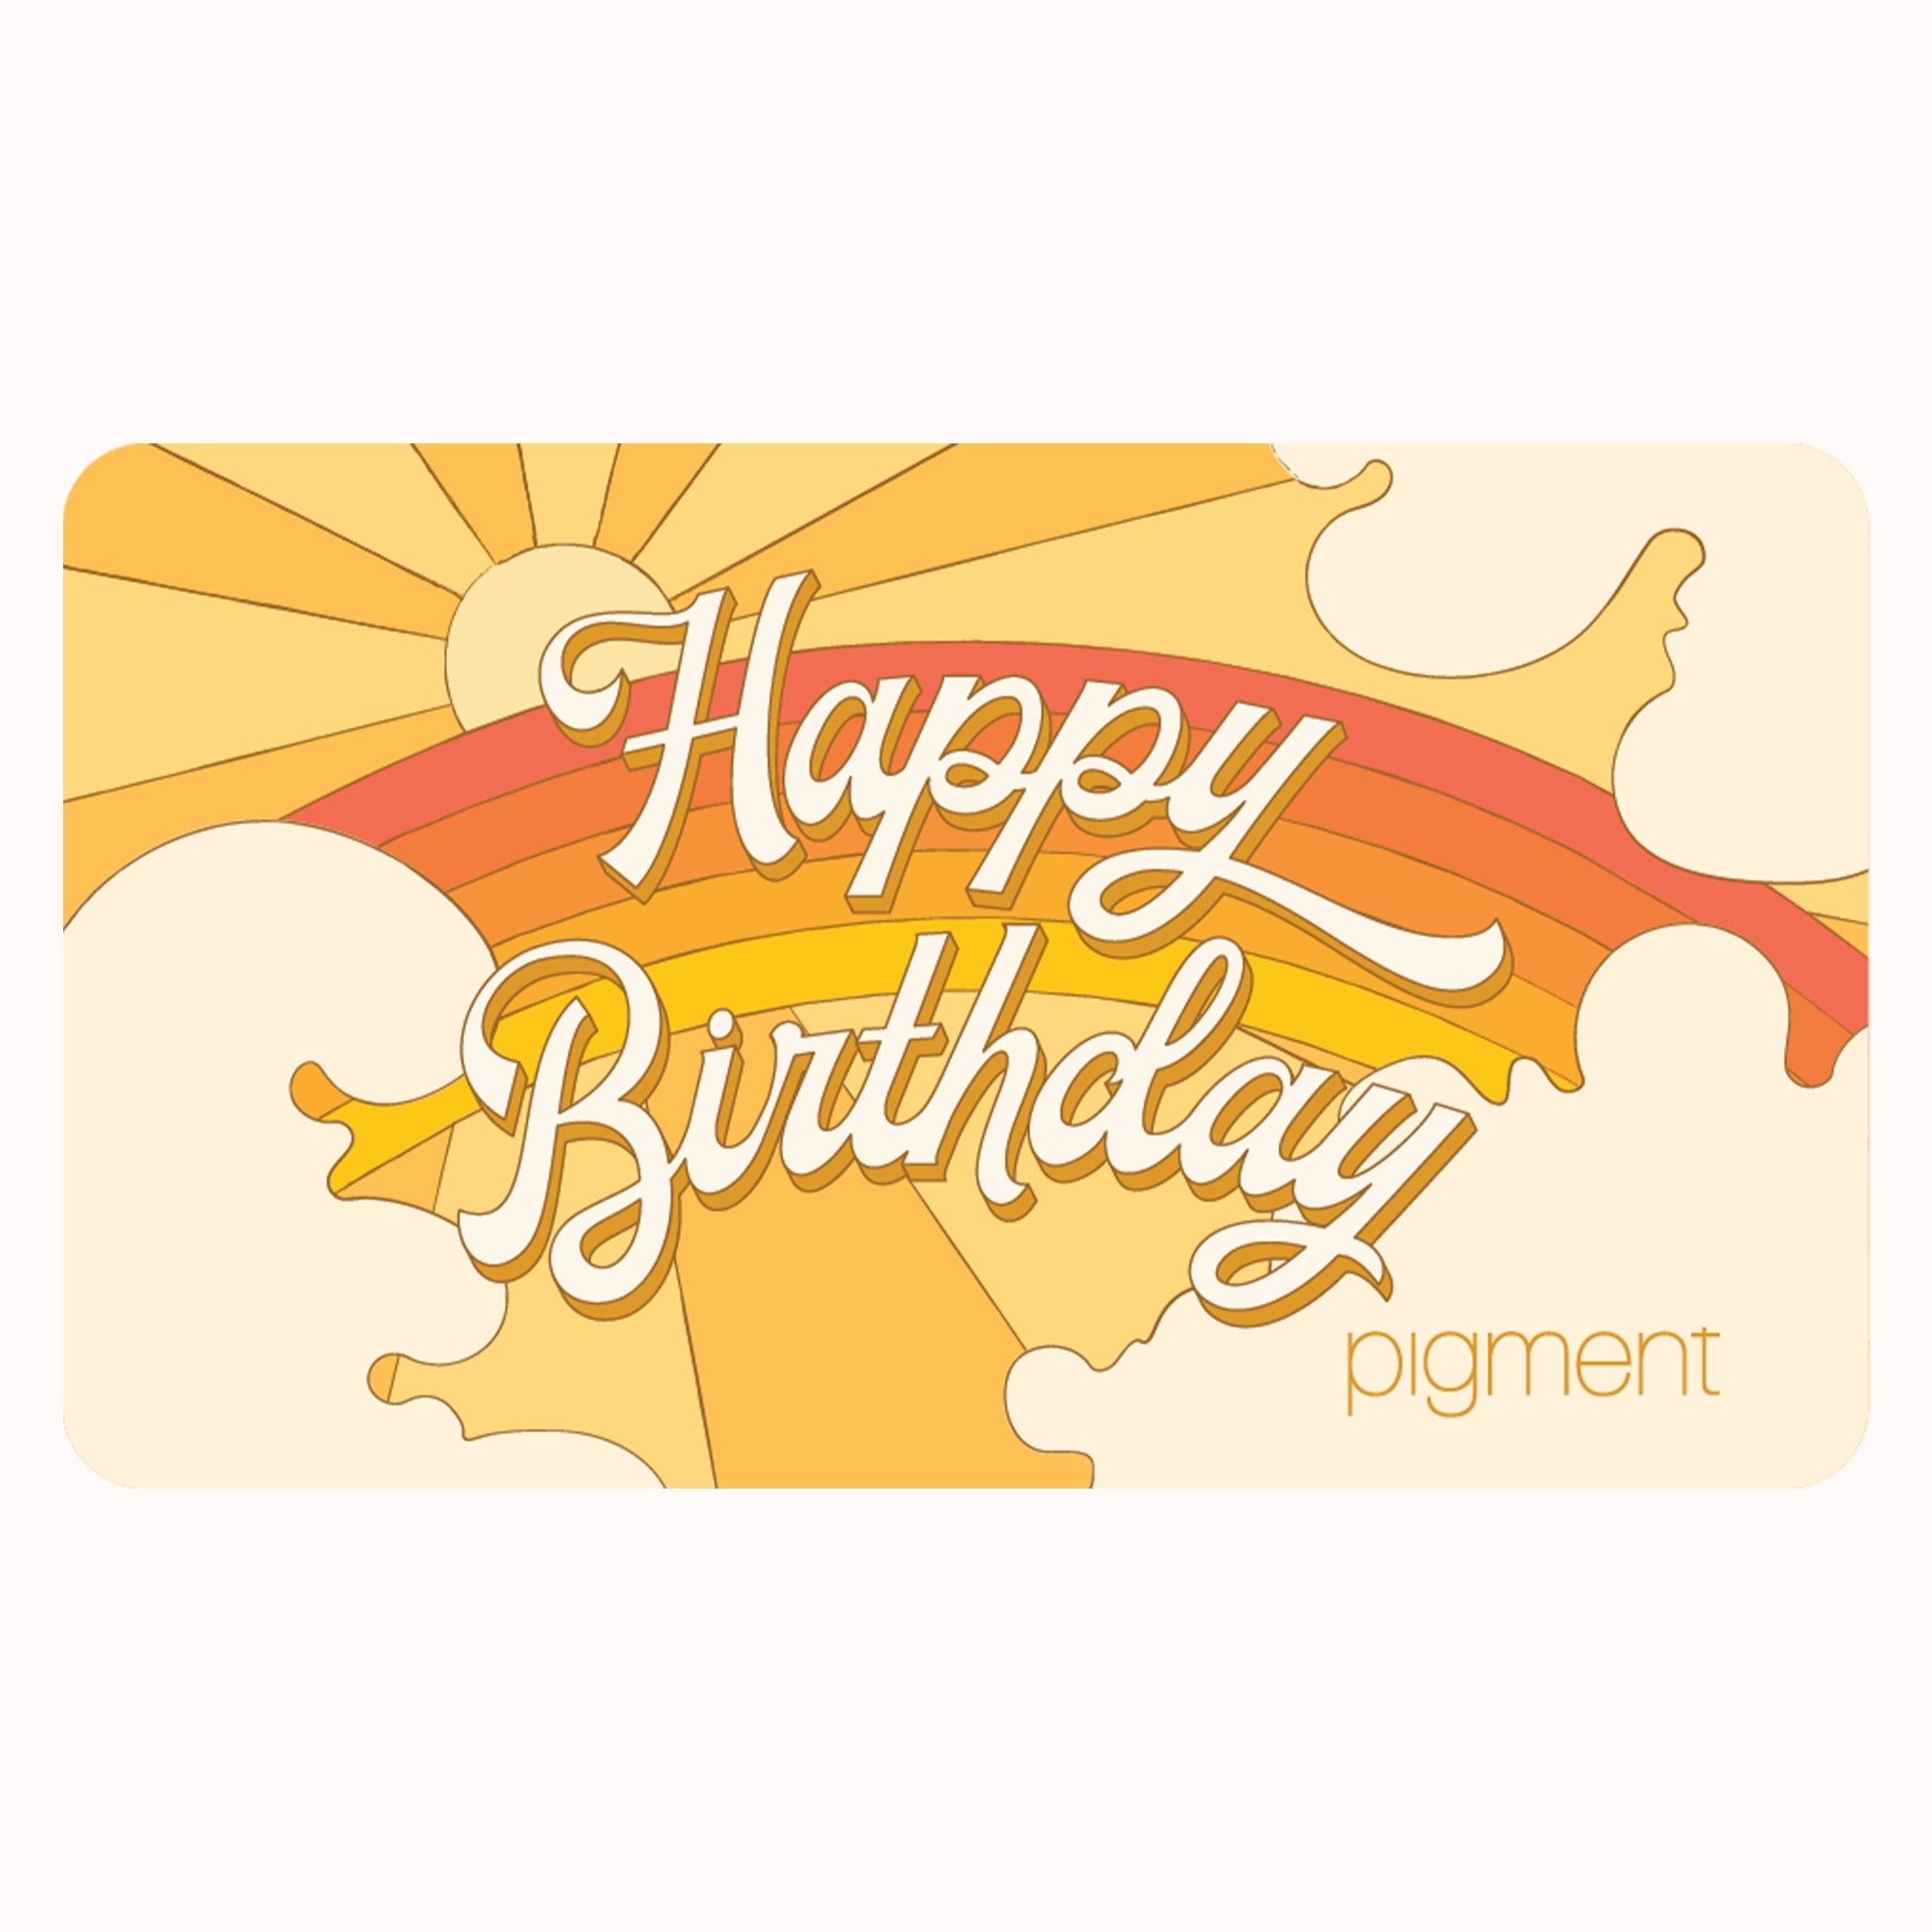 On a white background is an orange, yellow and red gift card with a rainbow and sky design along with ivory text across the front that reads, "Happy Birthday" and smaller text in the bottom right corner that reads, "Pigment".